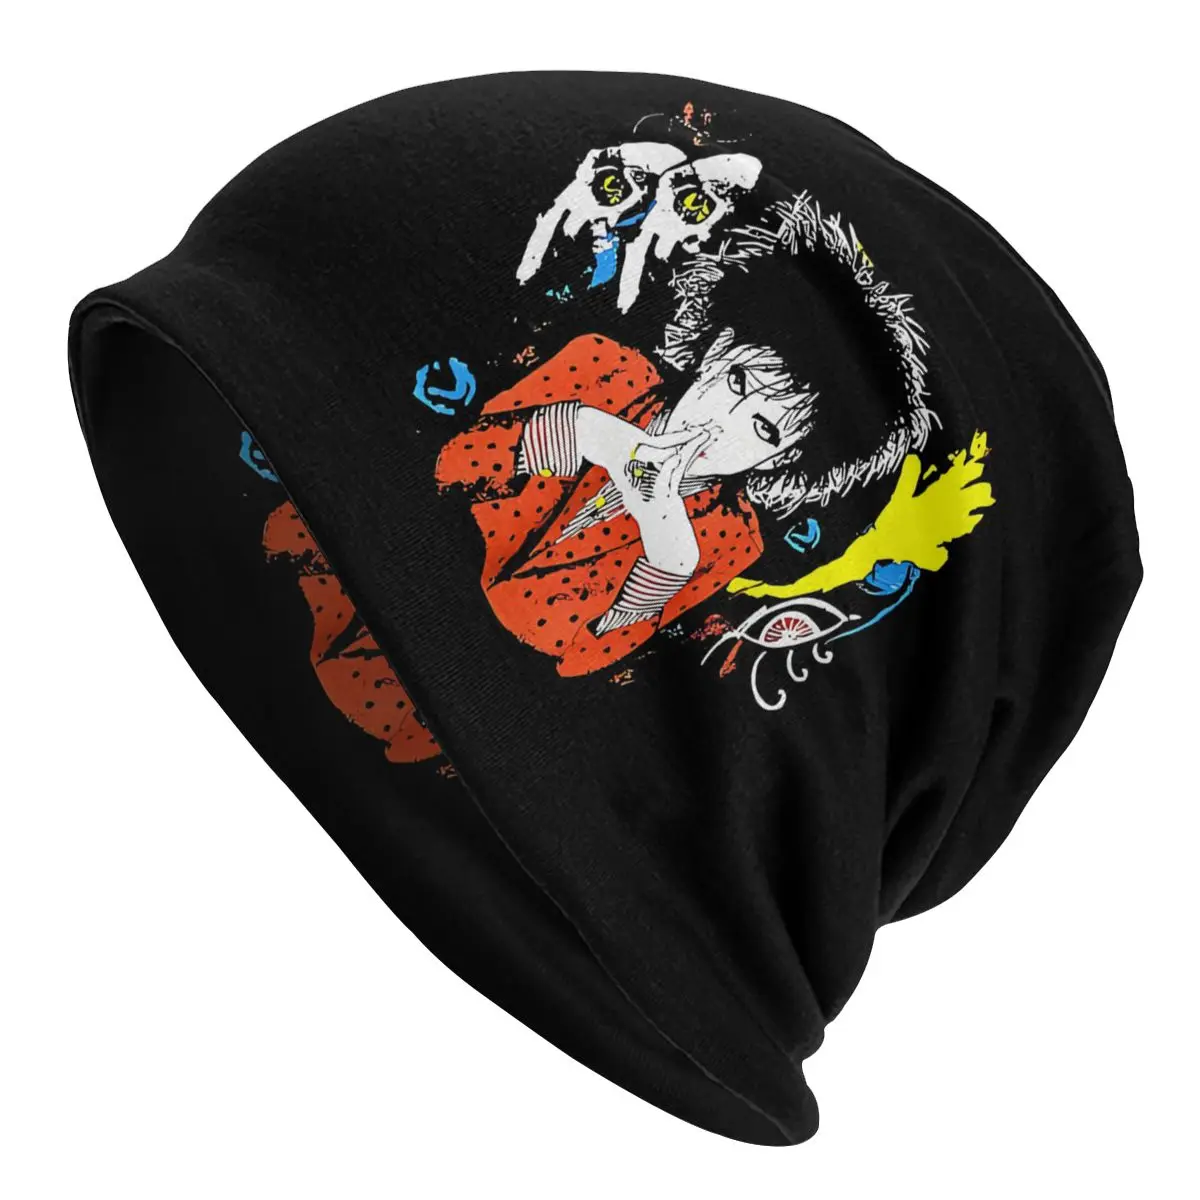 Vintage Love Song Black The Cure Washed Warm Bonnet Cycling Casual Beanies Protection Men Women Hats